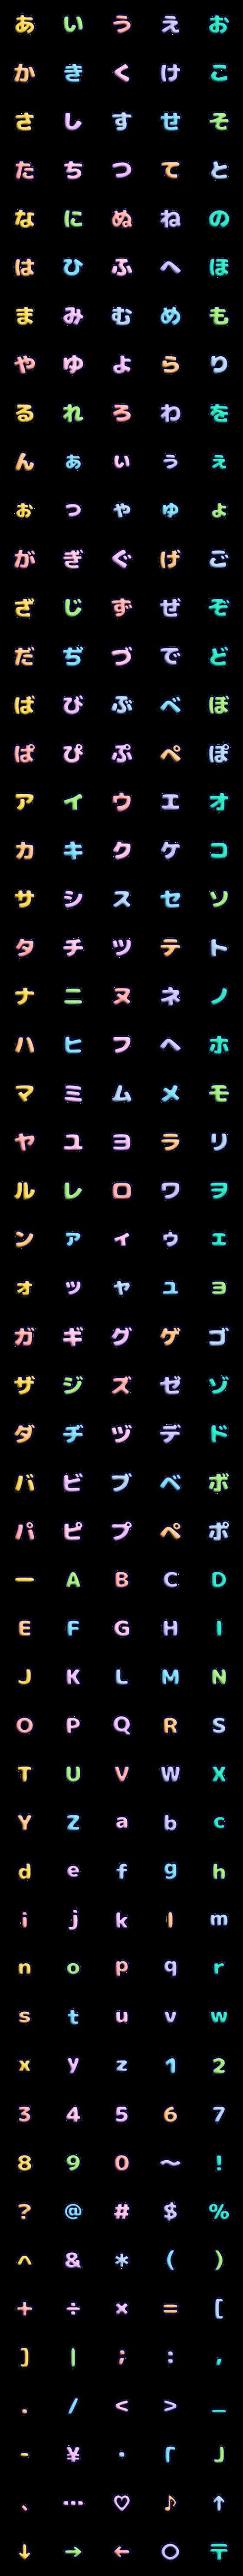 [LINE絵文字]❤️まわる！3Dデコ文字【265文字】の画像一覧